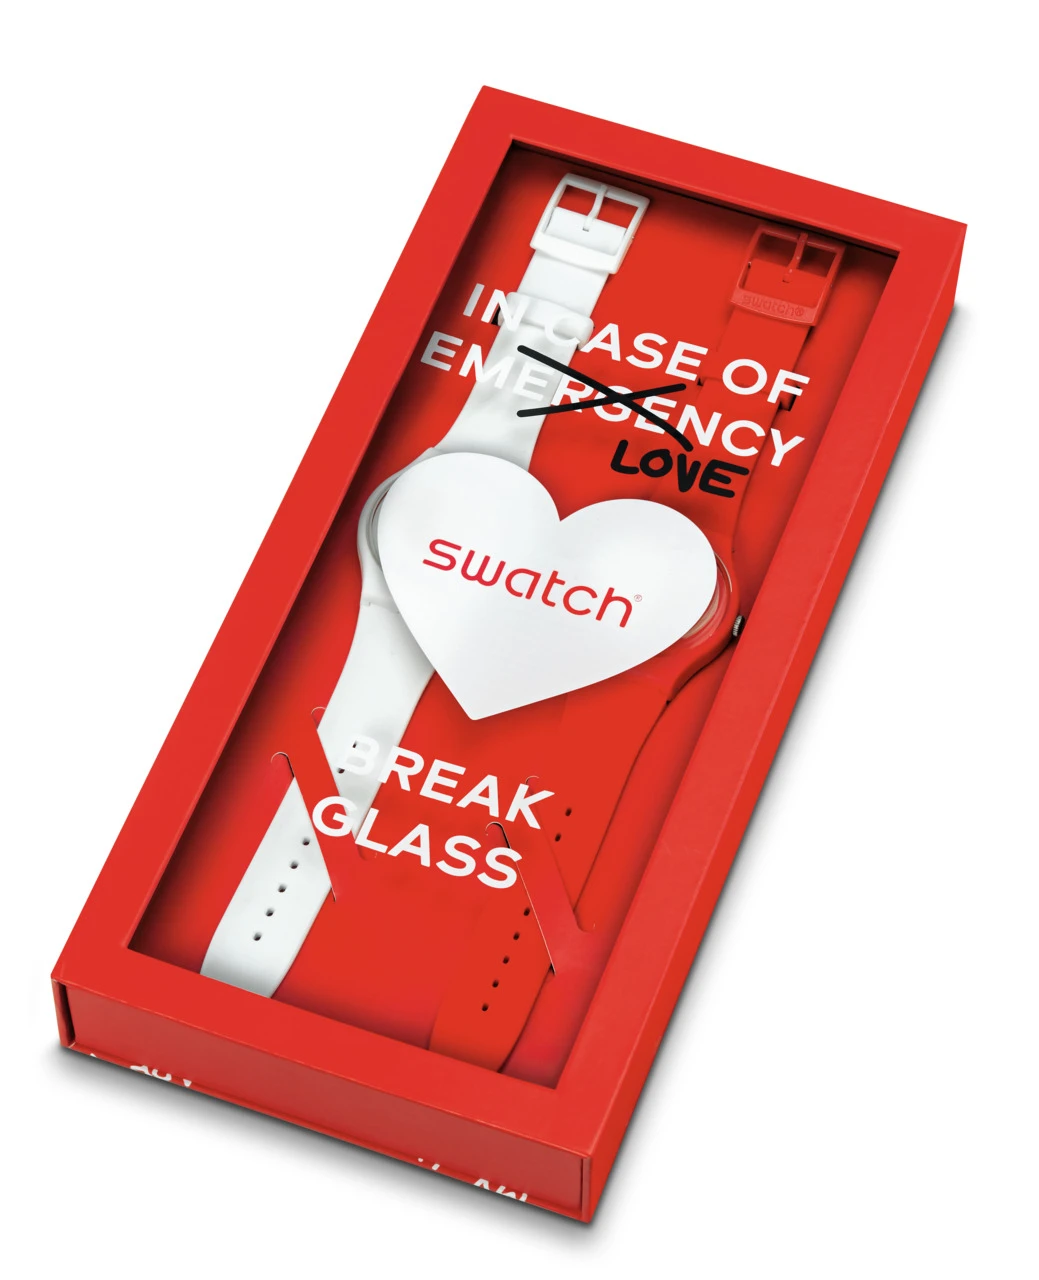 A swatch wristwatch shaped like a heart, placed inside a red box resembling an emergency break glass unit, with text reading "in case of emergency love.